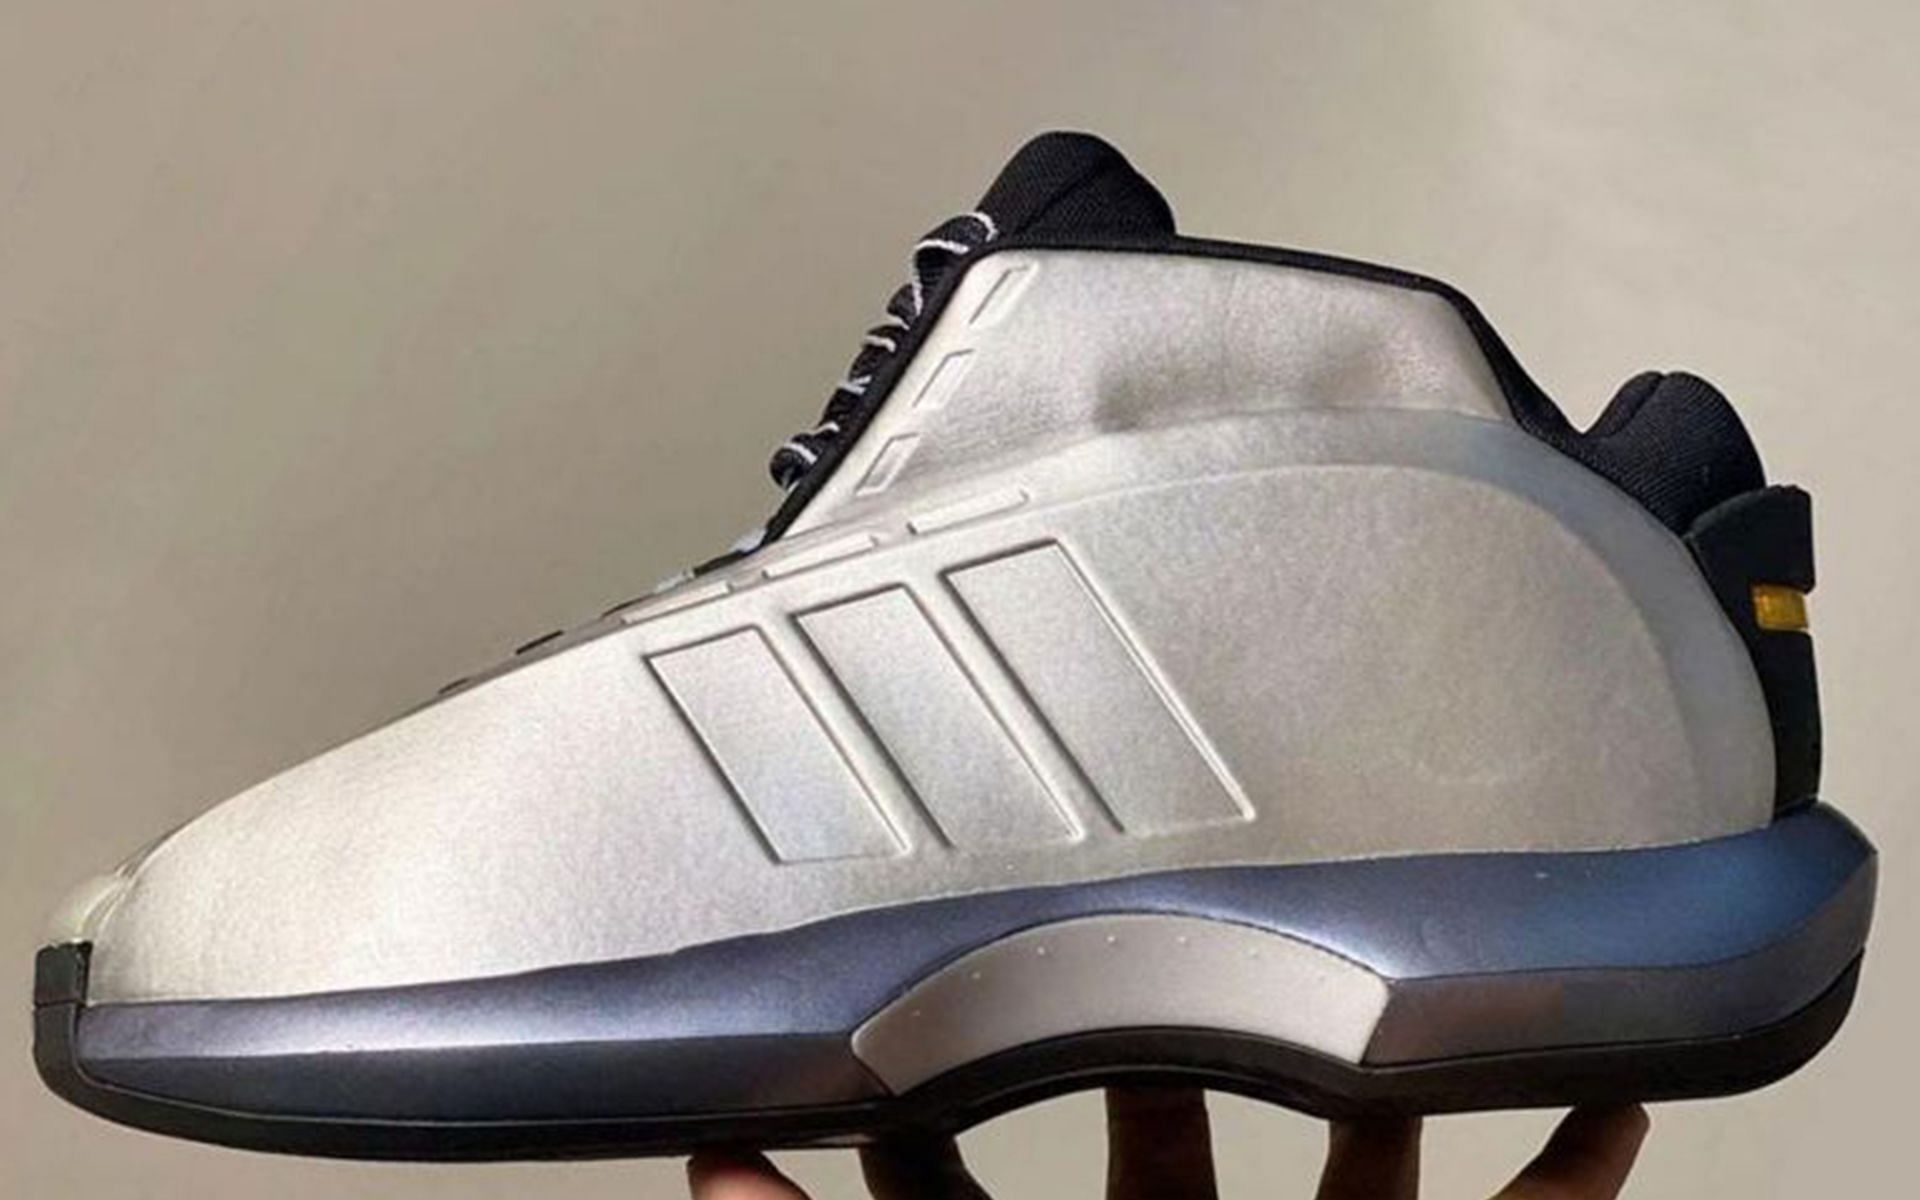 Where to buy Adidas Kobe OG Silver shoes ? Release date, price and more explored